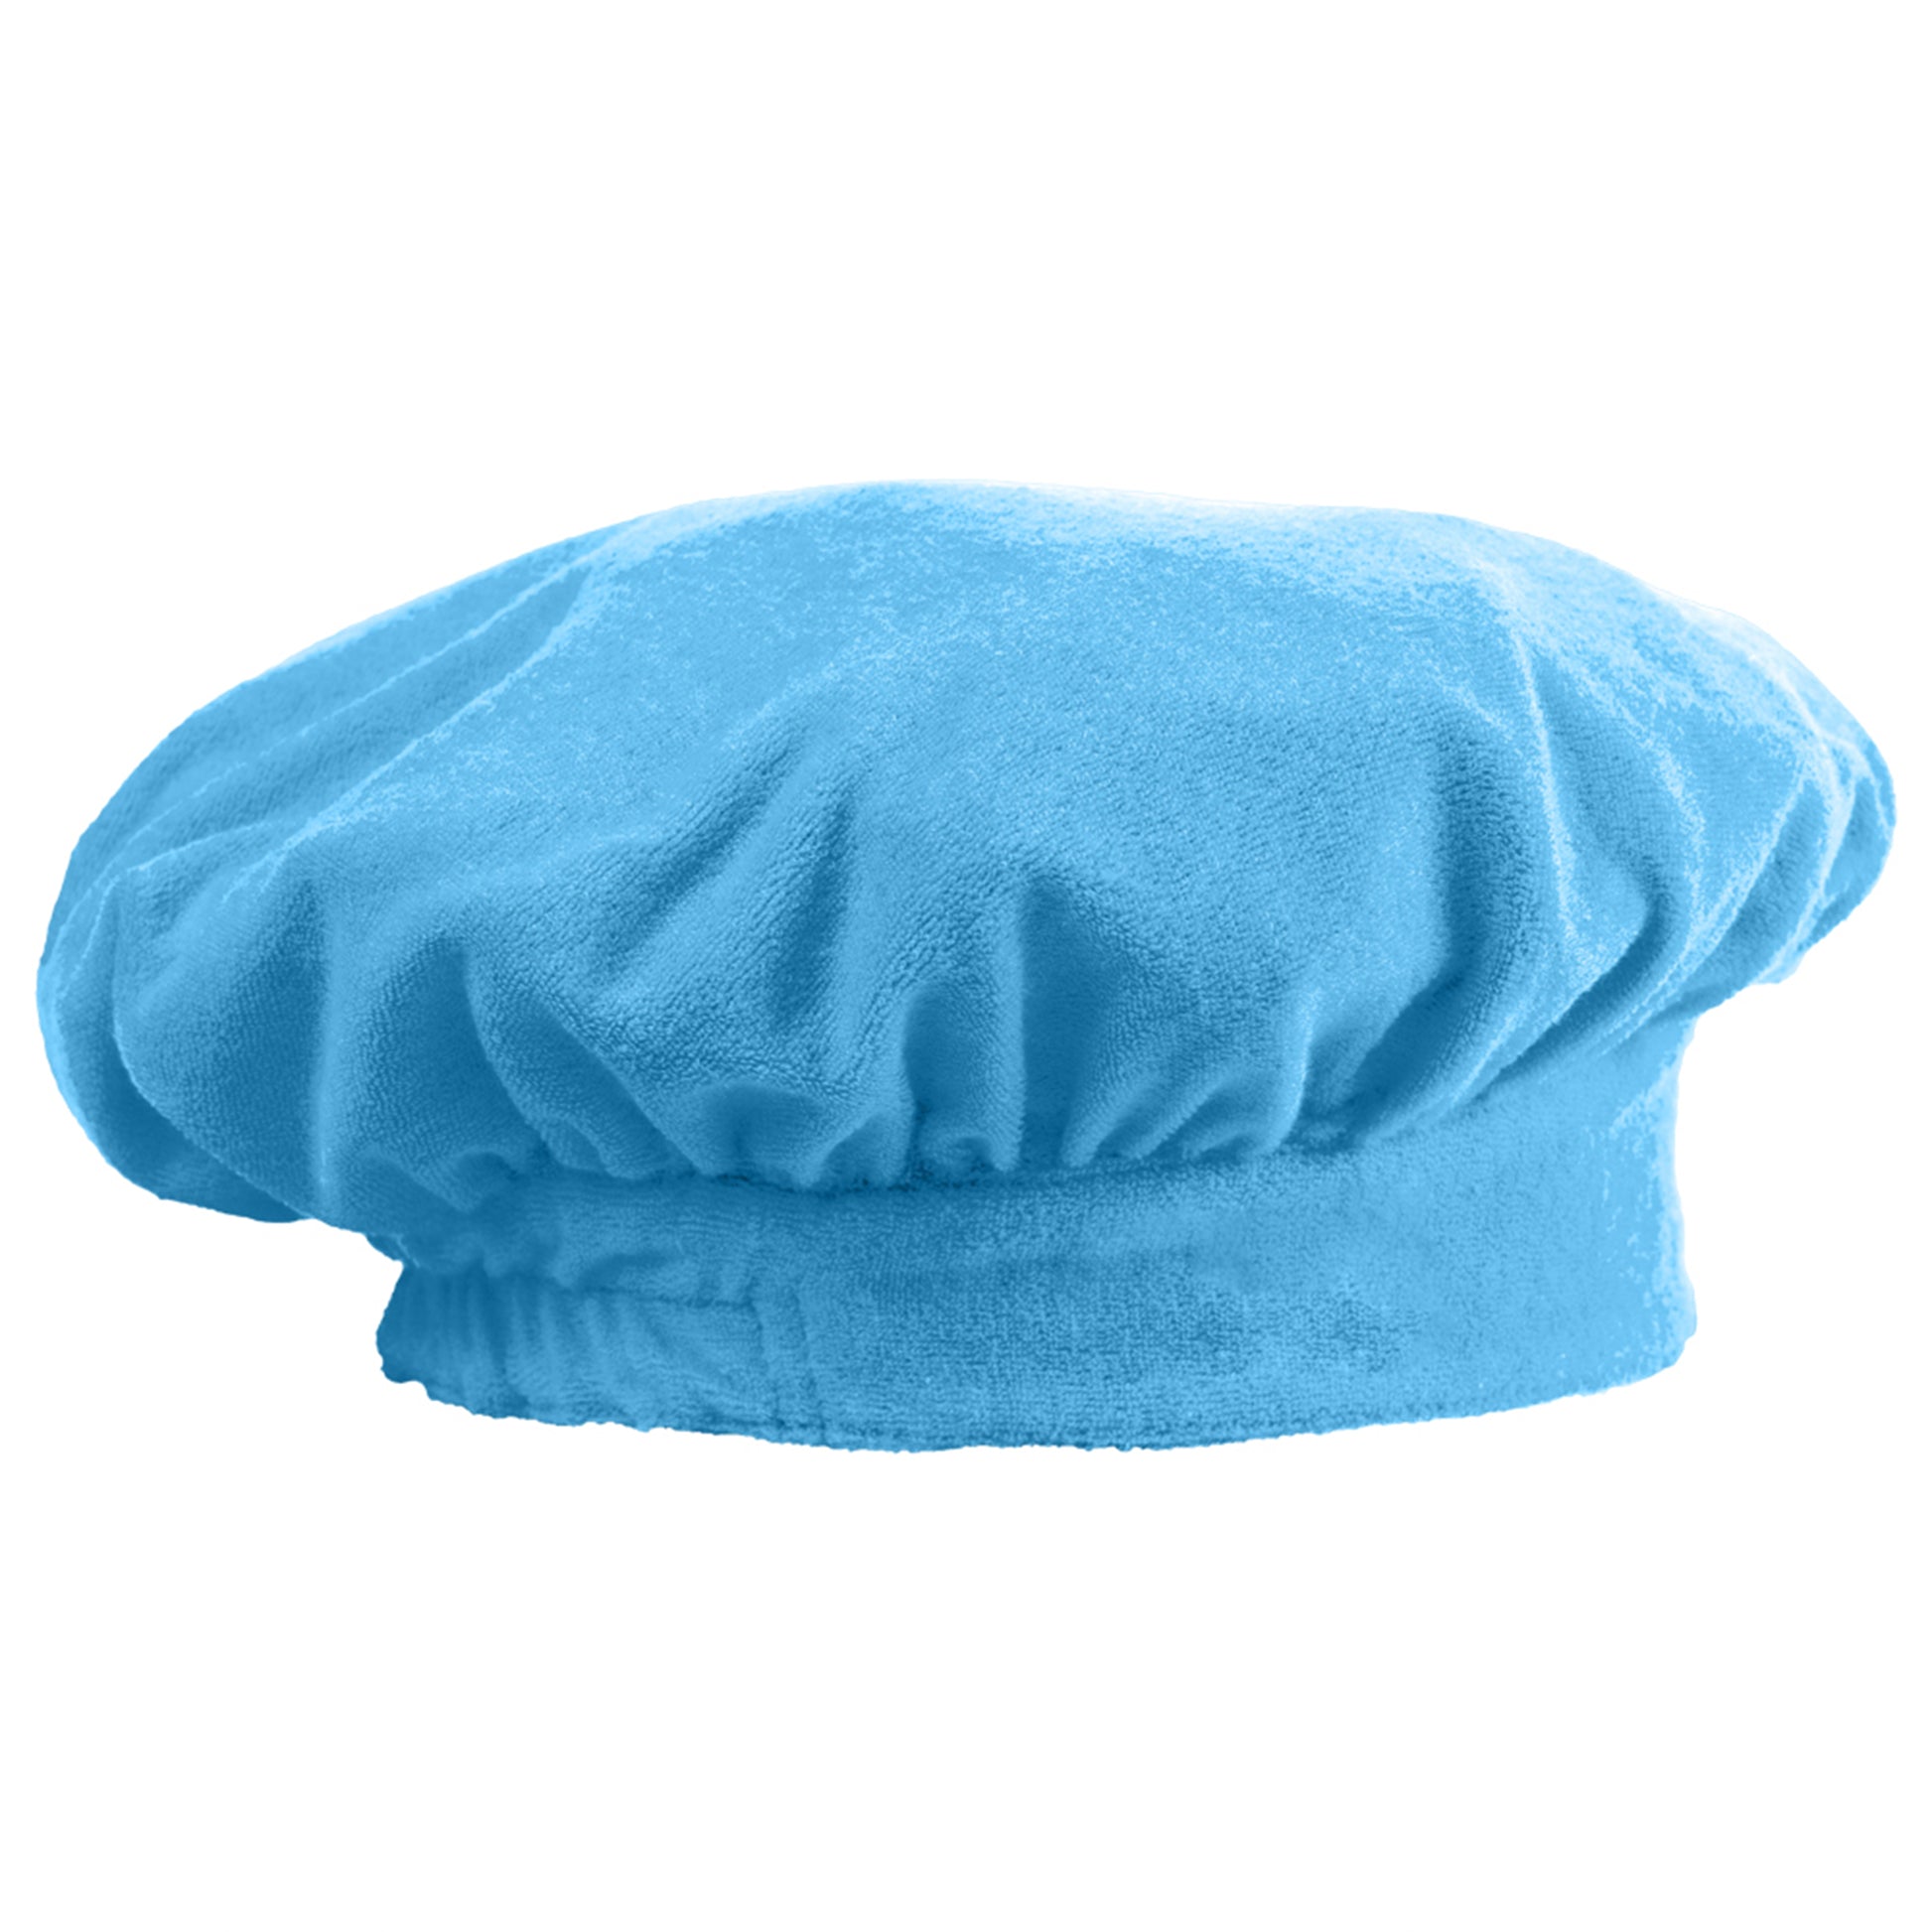 TIARA SHOWER CAP PAISLEY BLUE DESIGN REVERSED SHOWING THE TERRY CLOTH INSIDE. PATENTED PRODUCT 